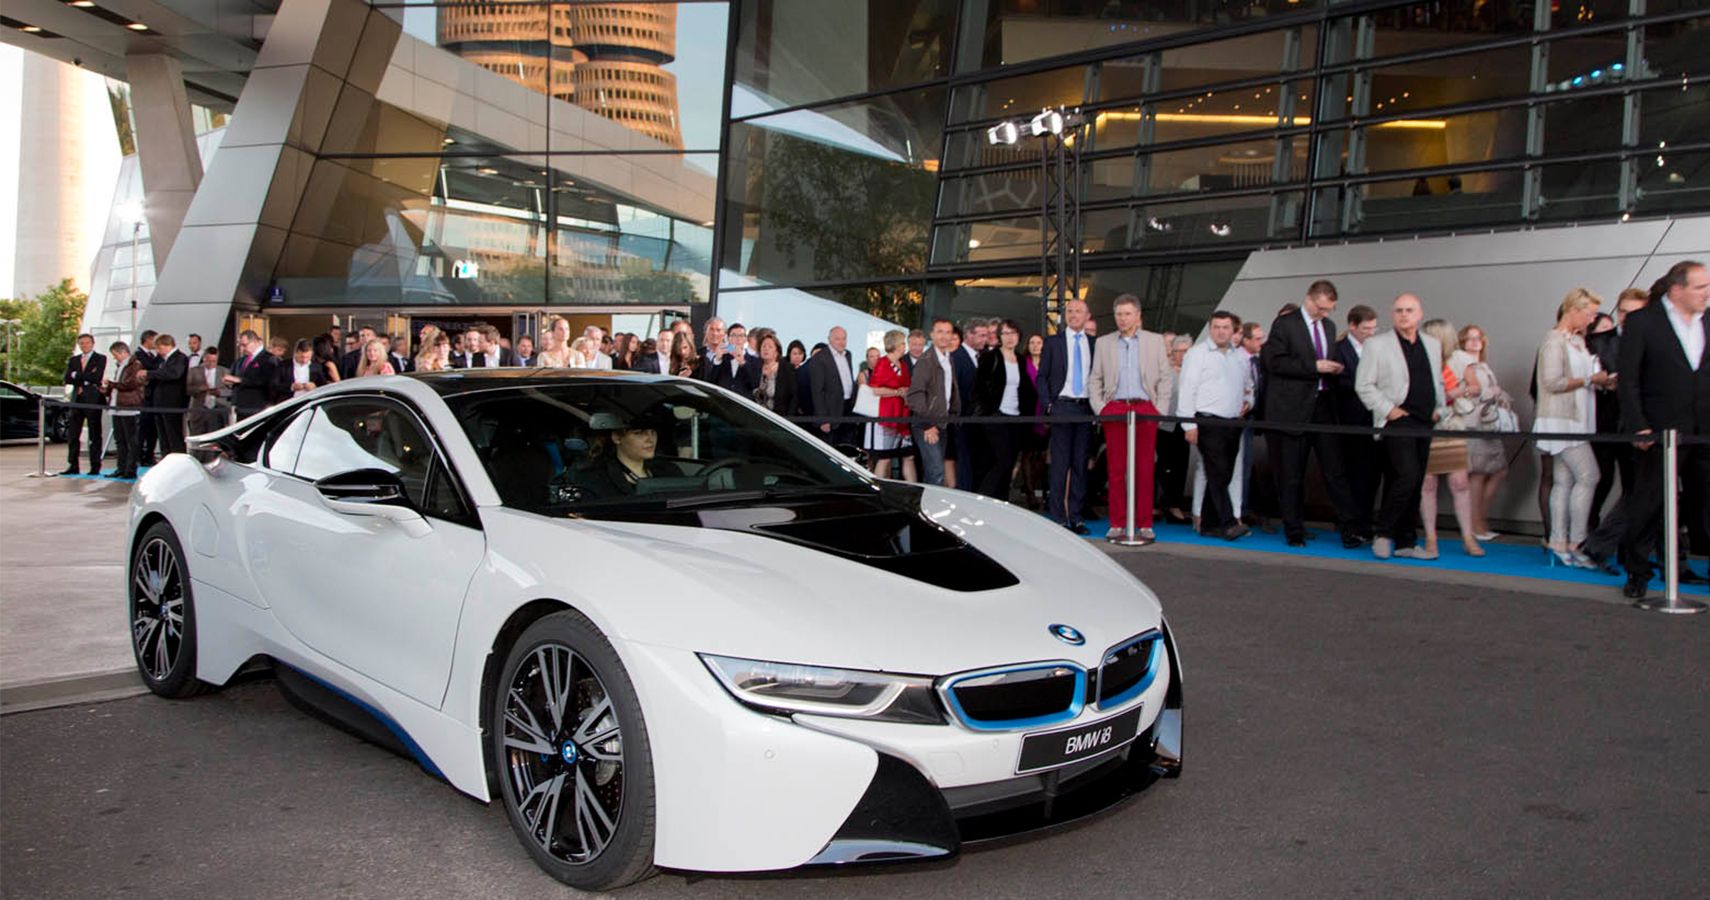 BMW i8 In Front Of Line Of People